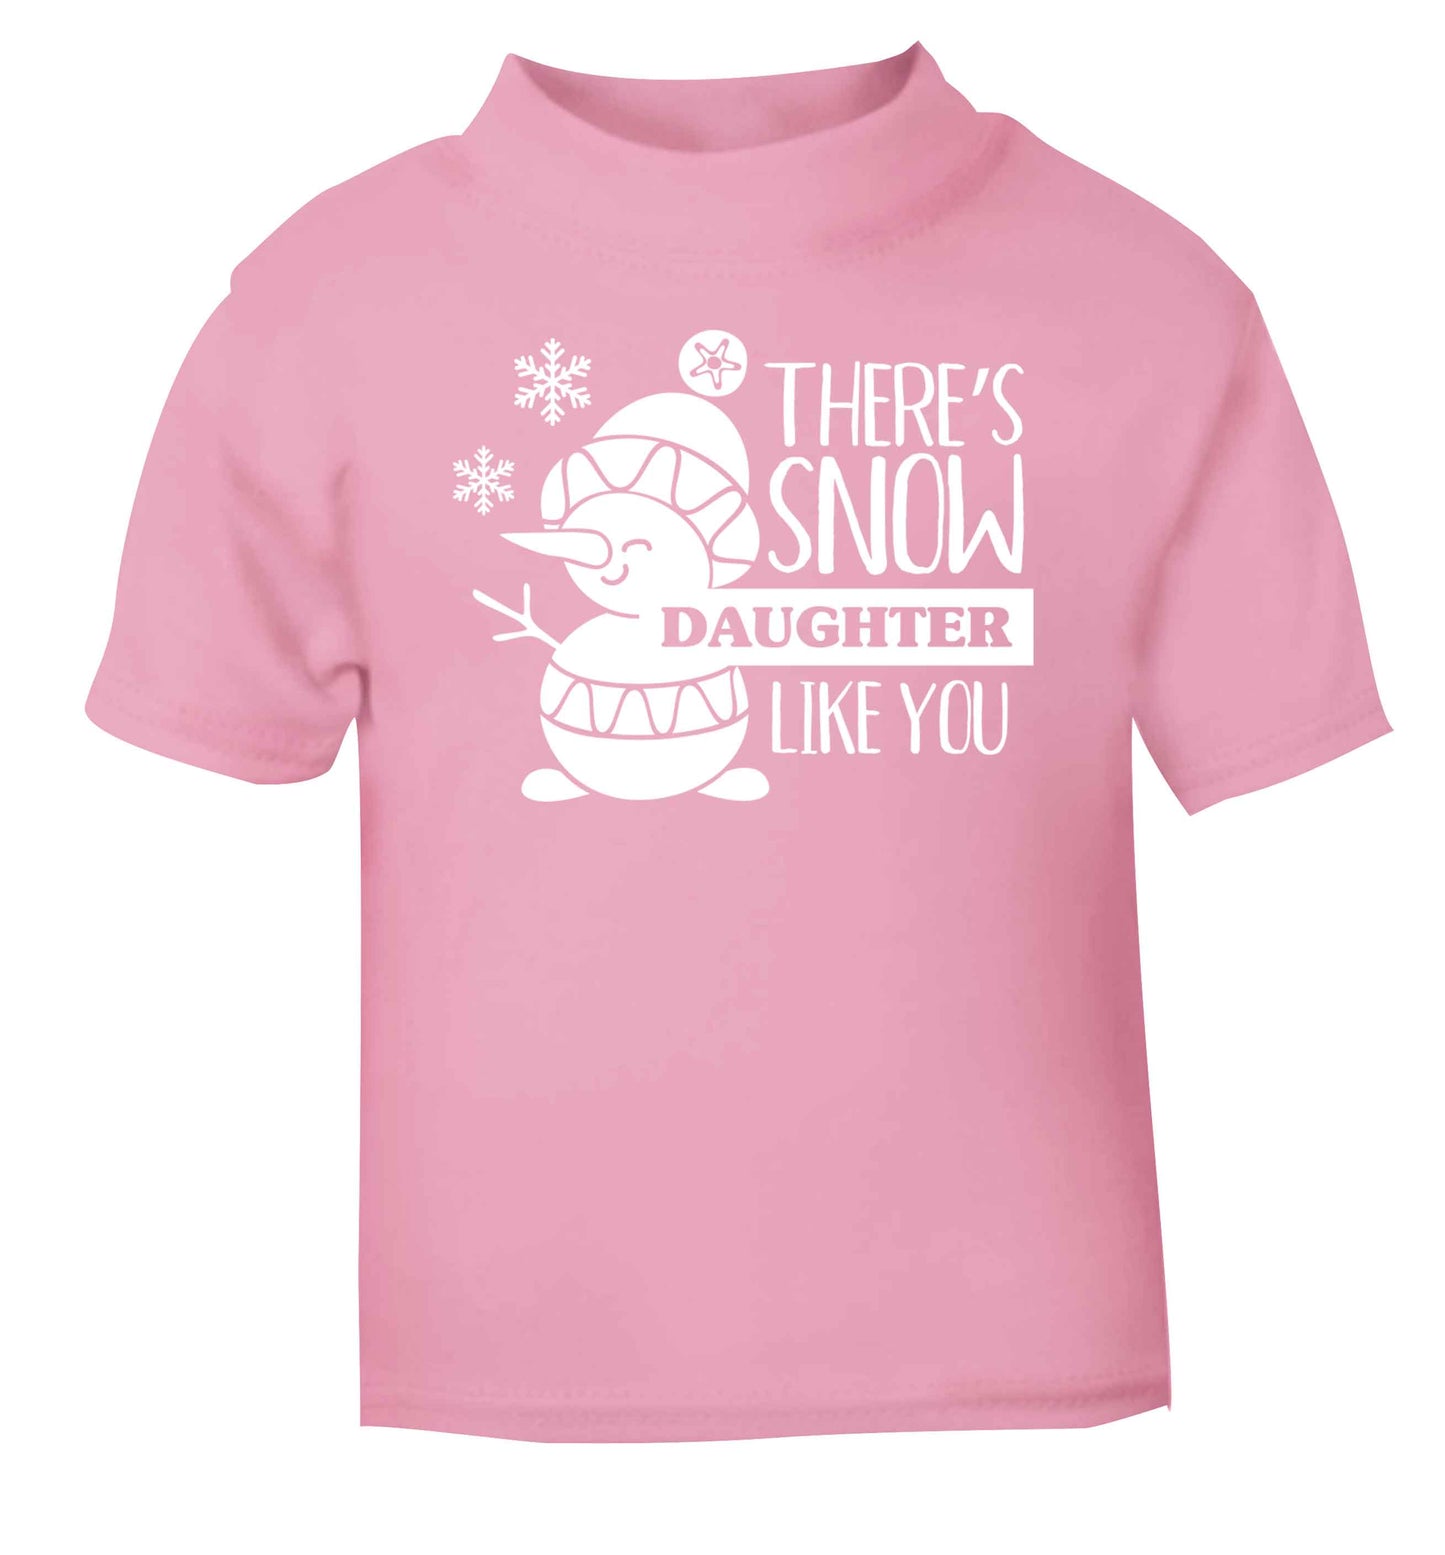 There's snow daughter like you light pink baby toddler Tshirt 2 Years